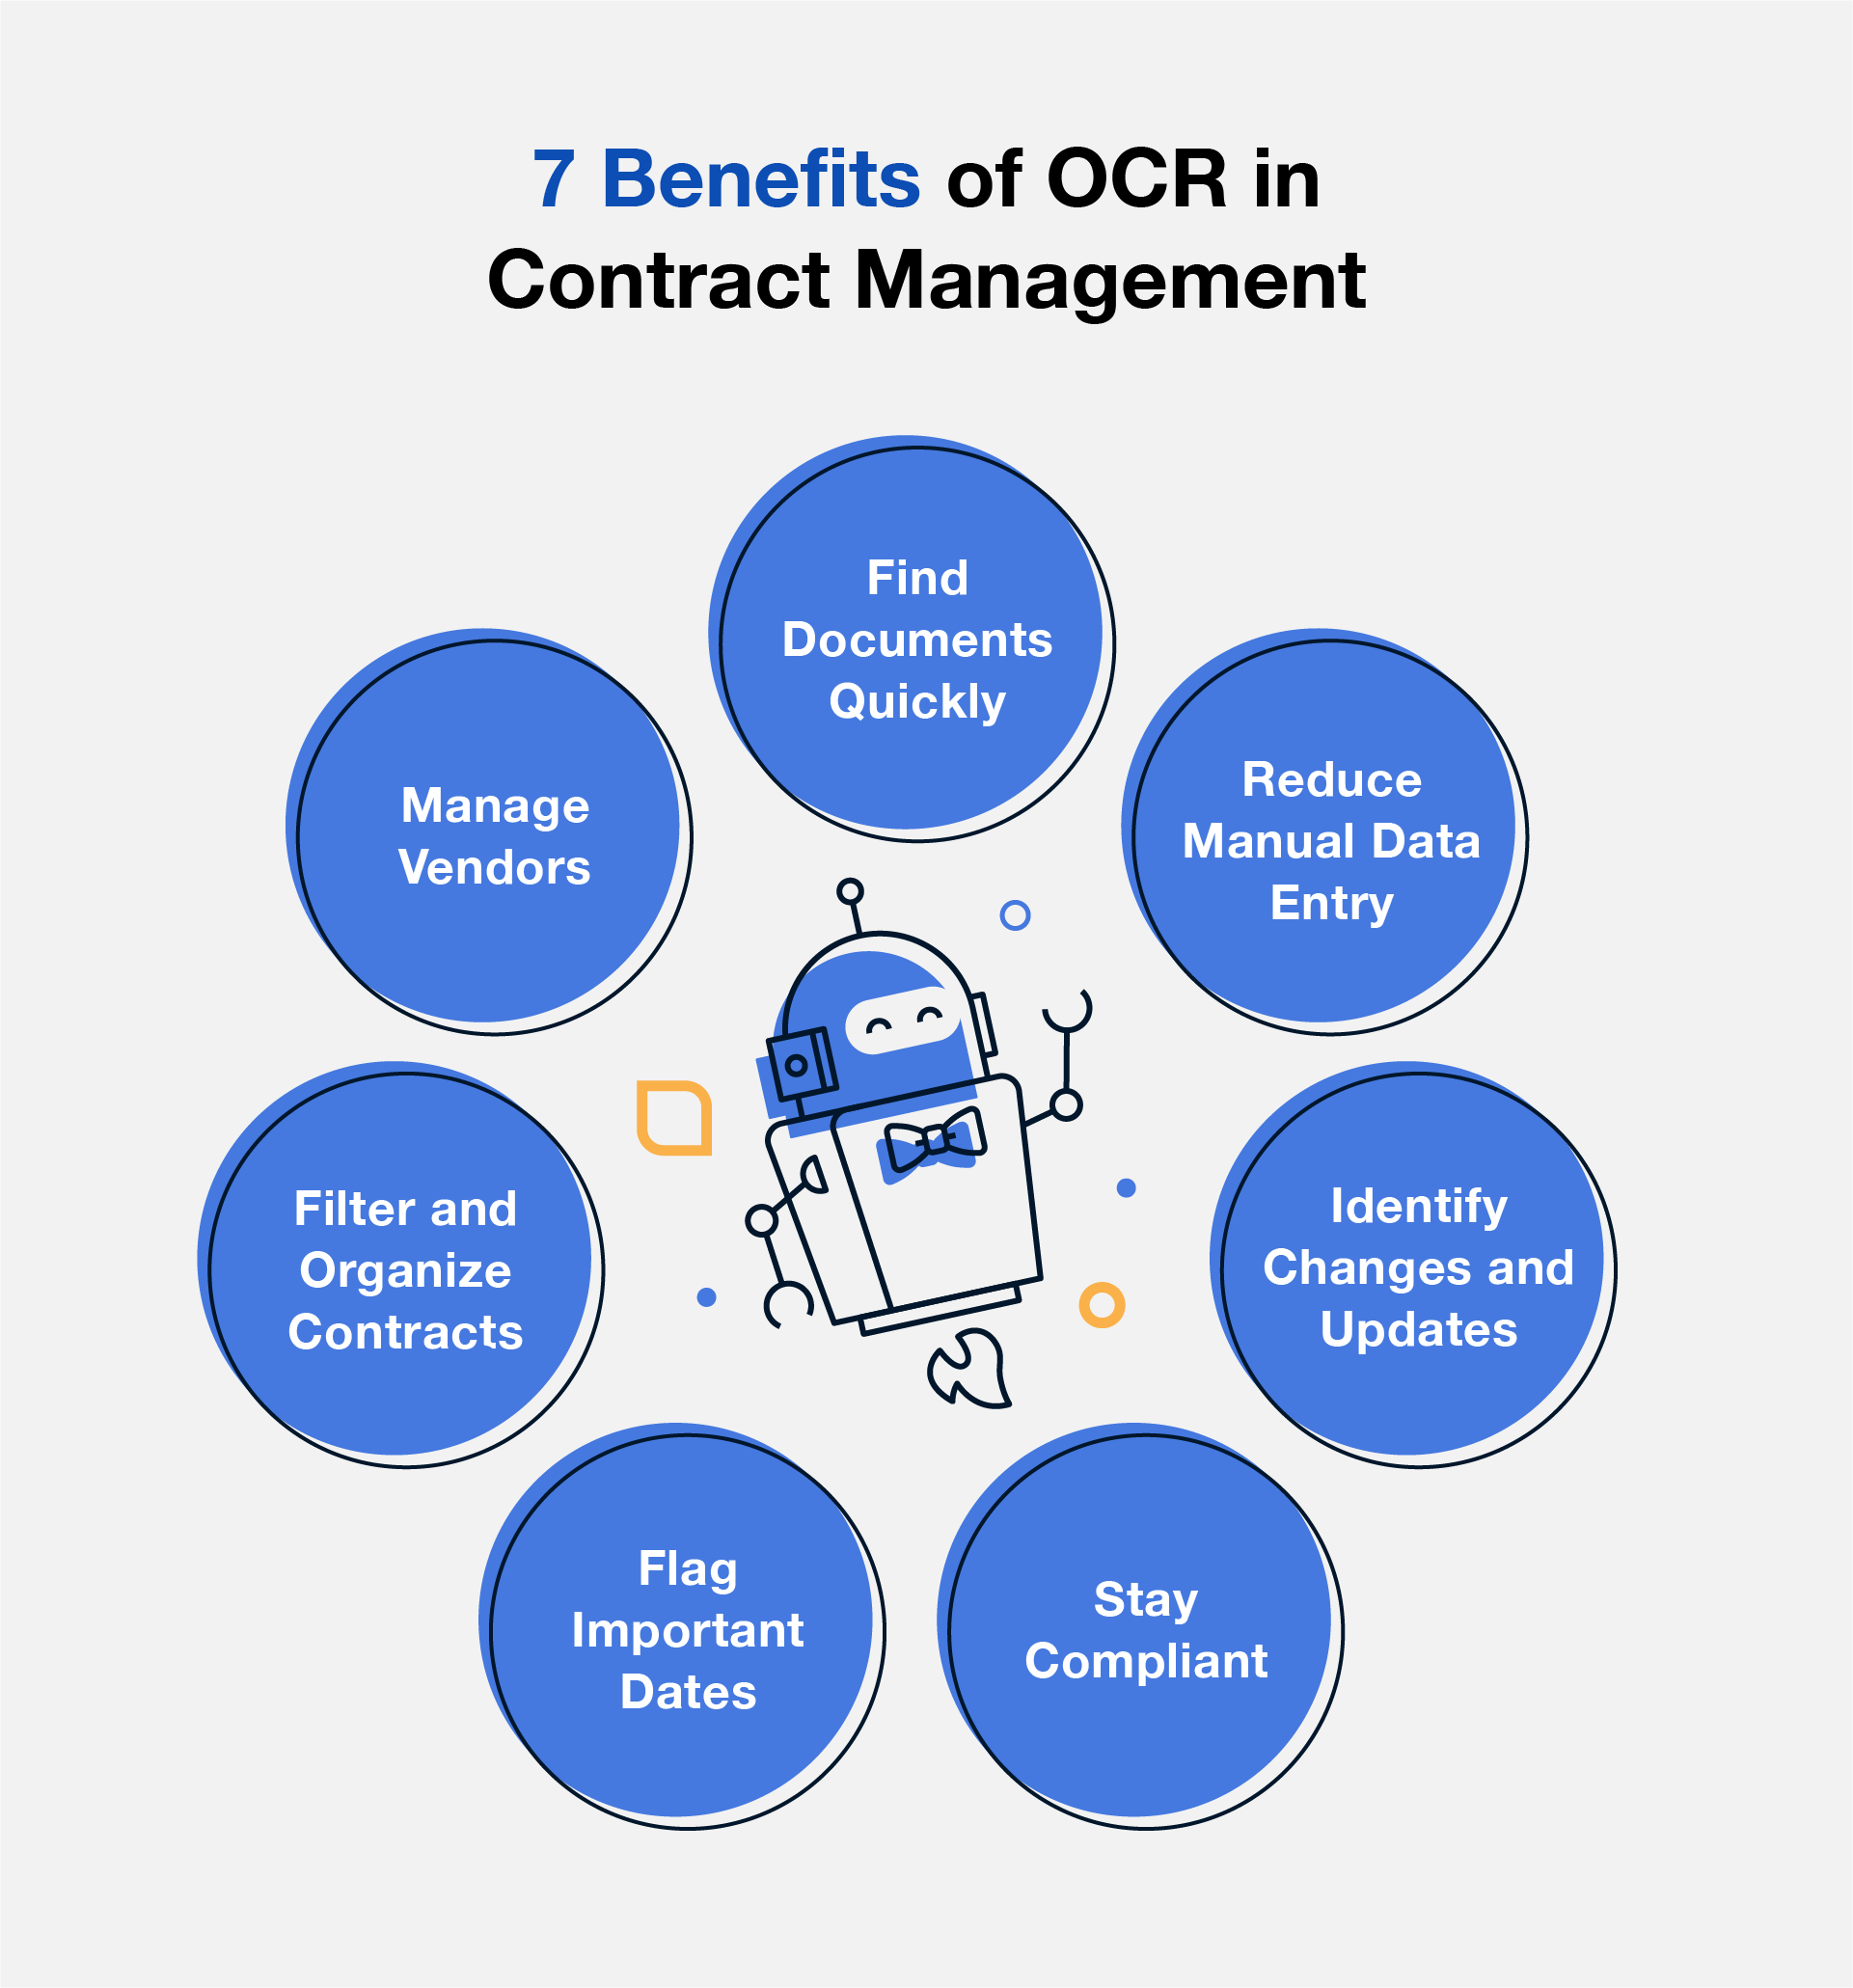 7 Benefits of OCR in Contract Management